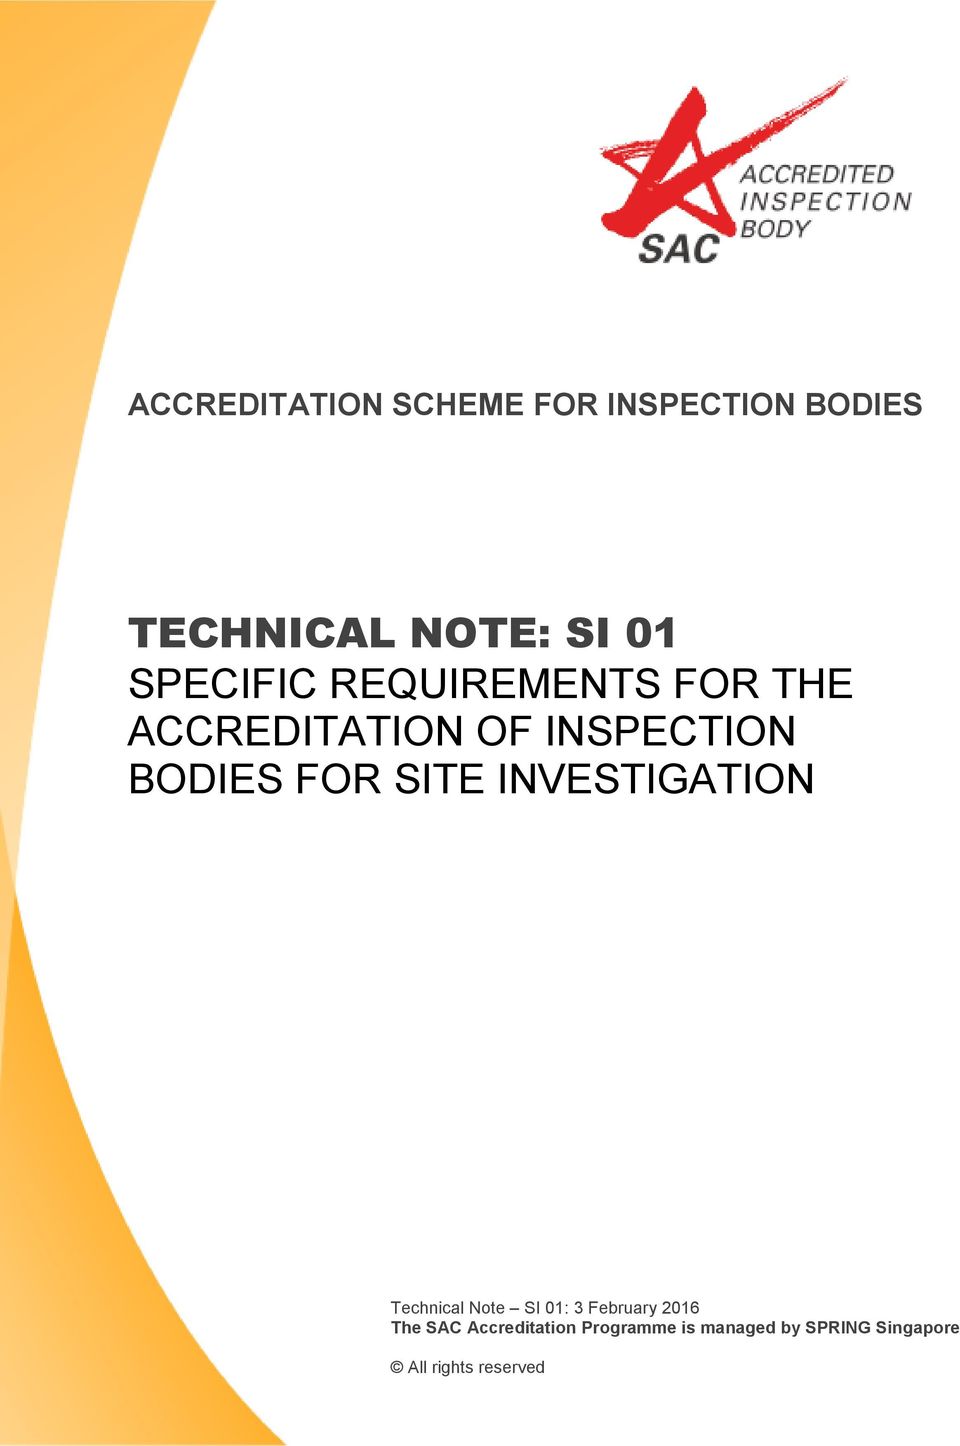 SITE INVESTIGATION Technical Note SI 01: 3 February 2016 The SAC